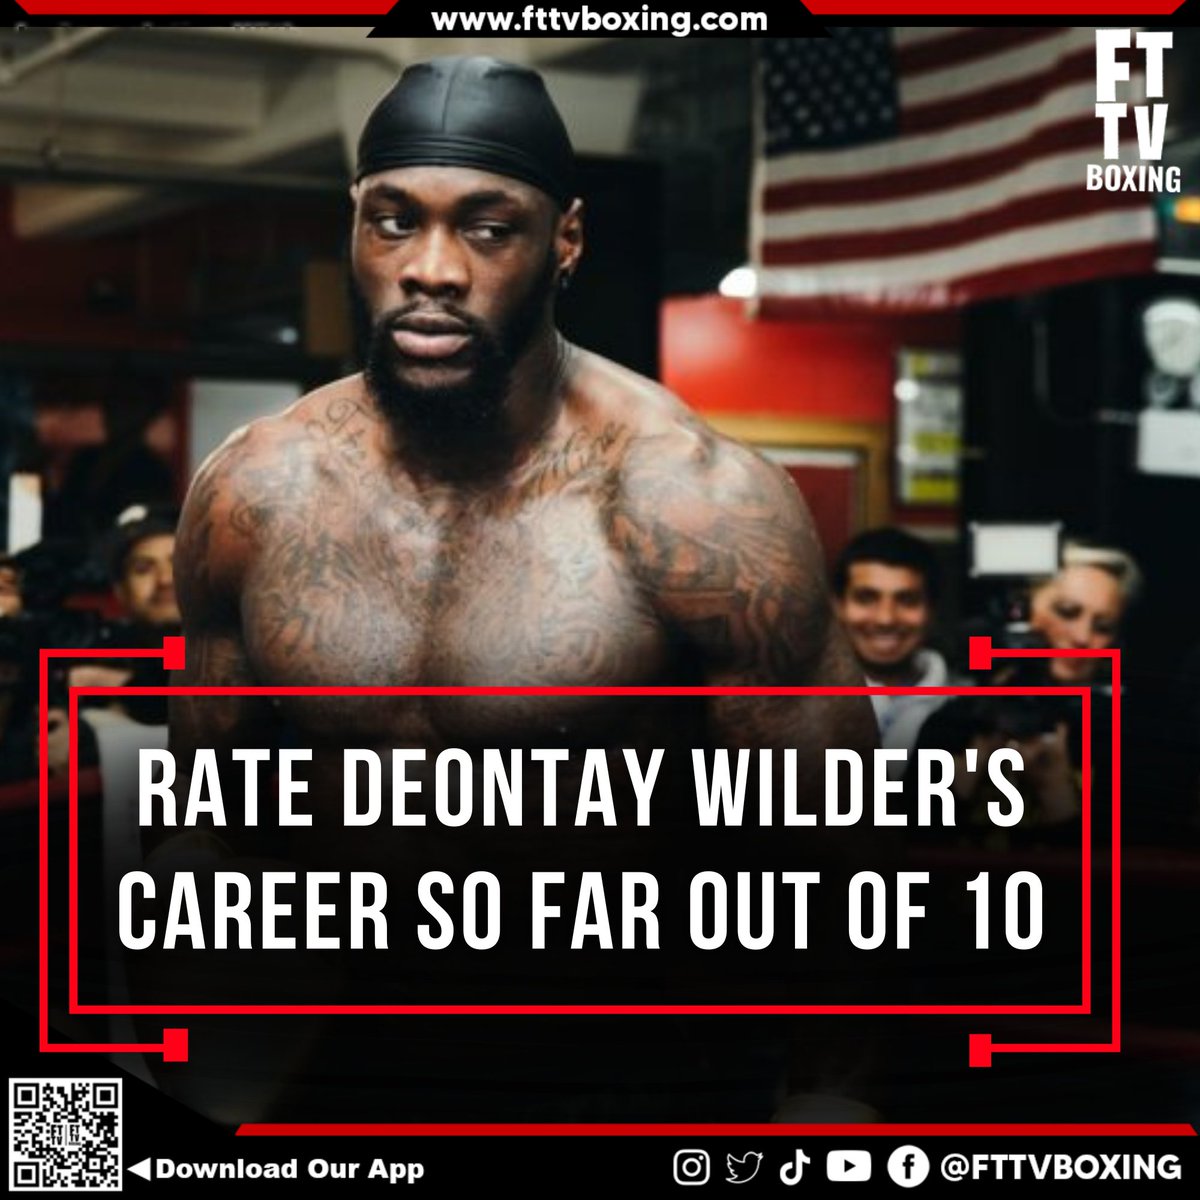 On a scale of 1 to 10, how would you rate Deontay Wilder's career so far? 🤔

#deontaywilder #heavyweight #boxingfans #boxing #fightfans